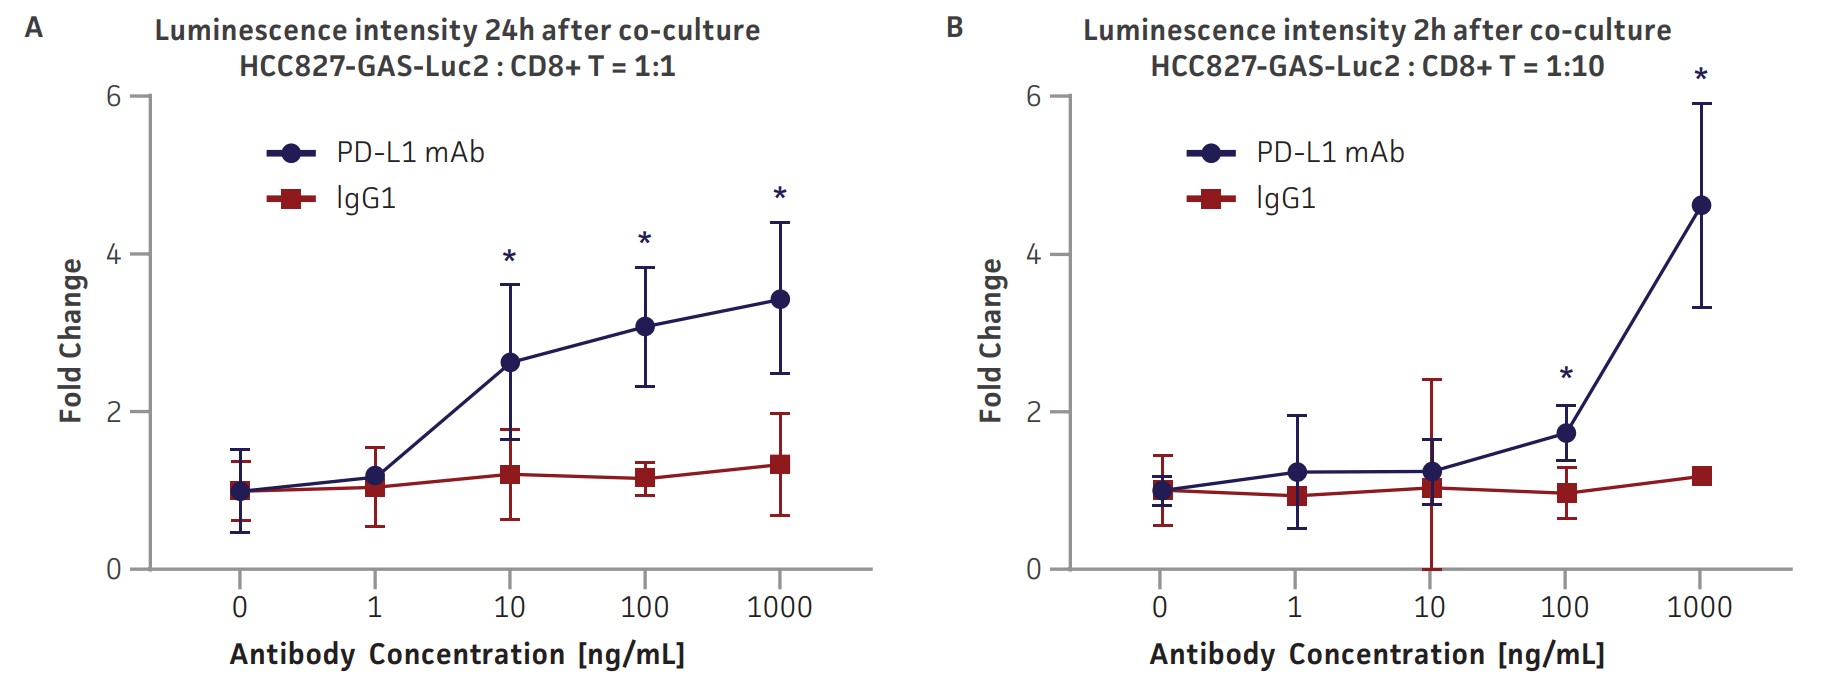 Co-culture of GAS-Luc2 cell lines with primary human immune cells